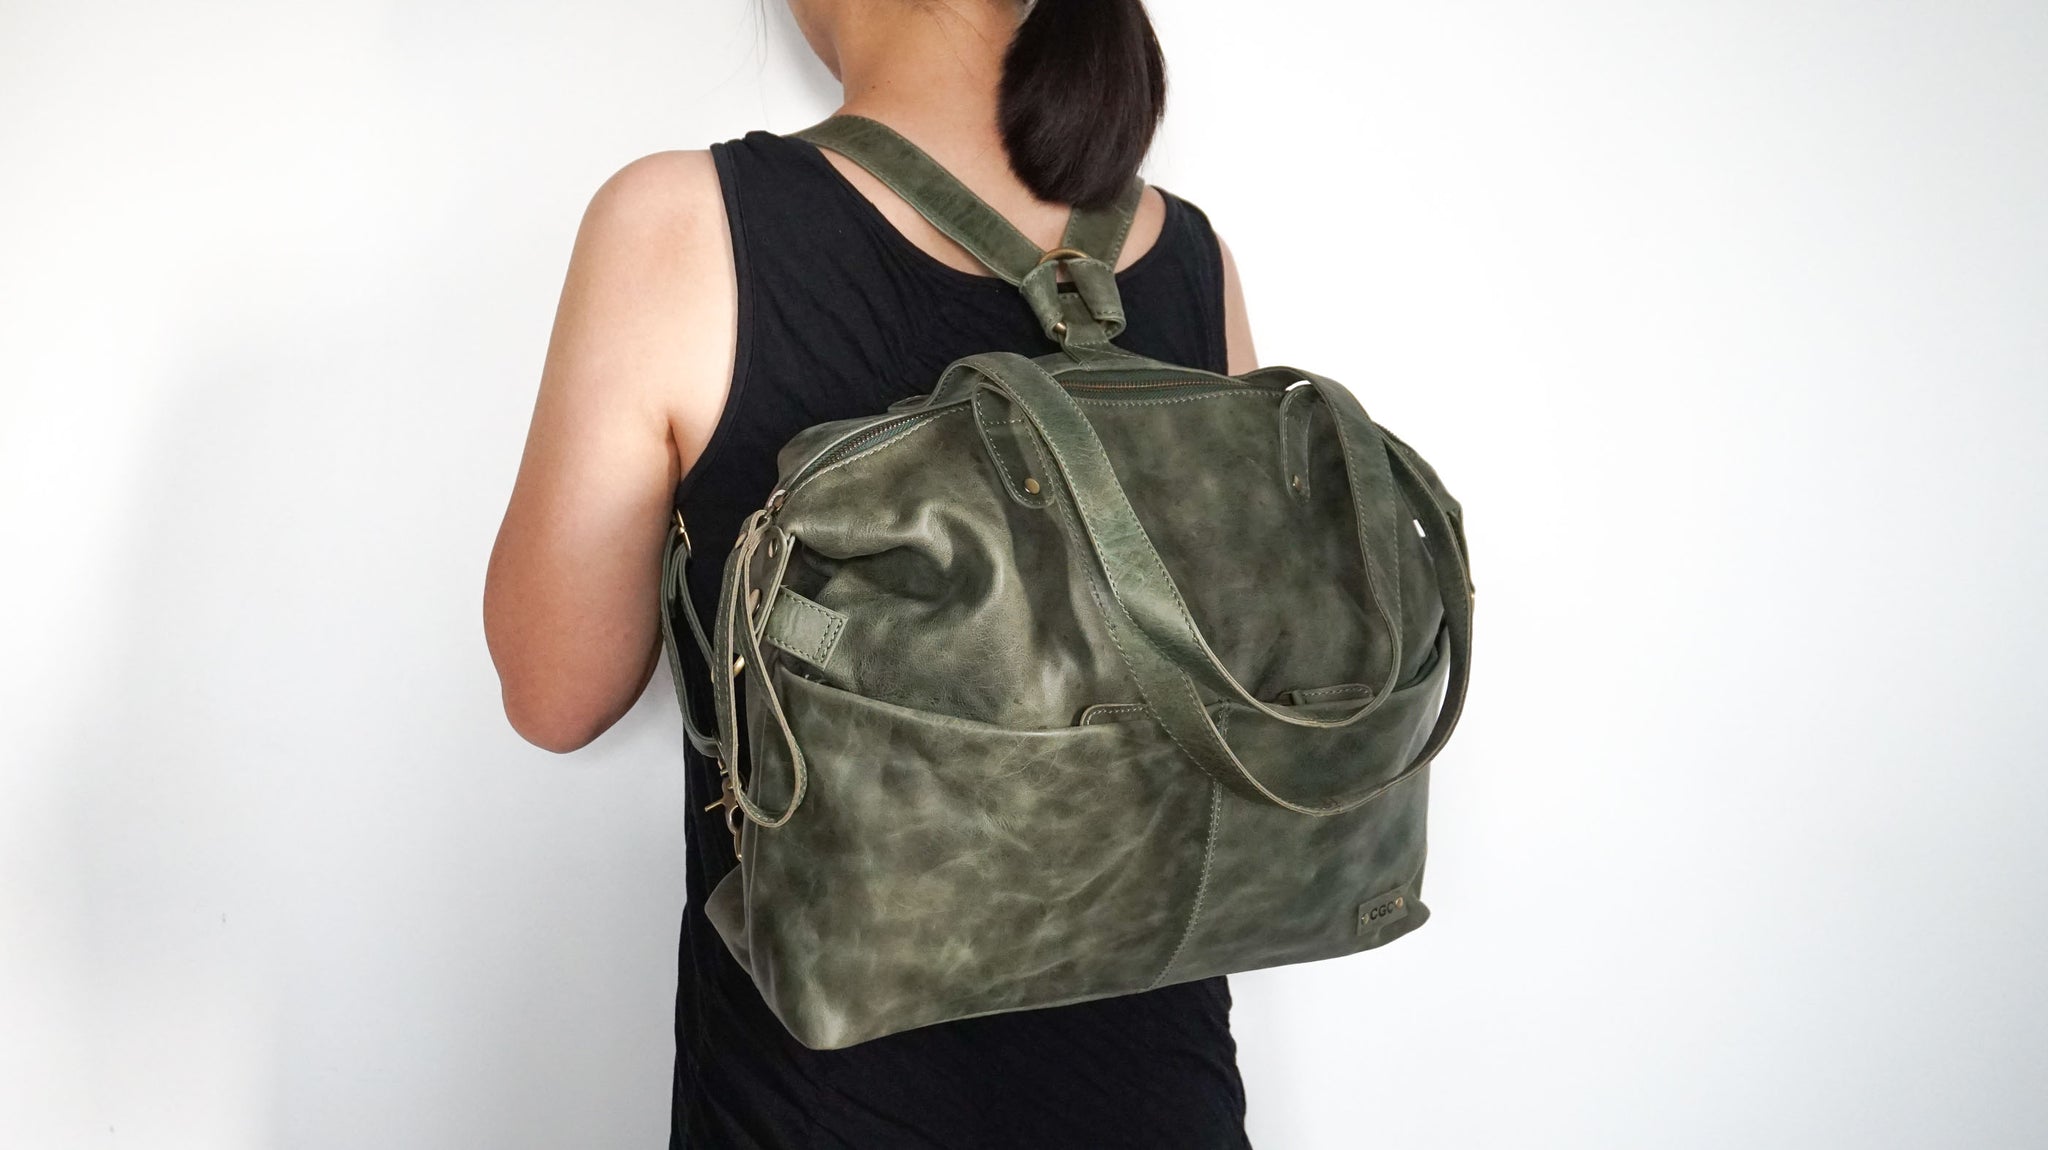 Olive Green Vince Camuto Convertible backpack purse | Convertible backpack  purse, Backpack purse, Convertible backpack